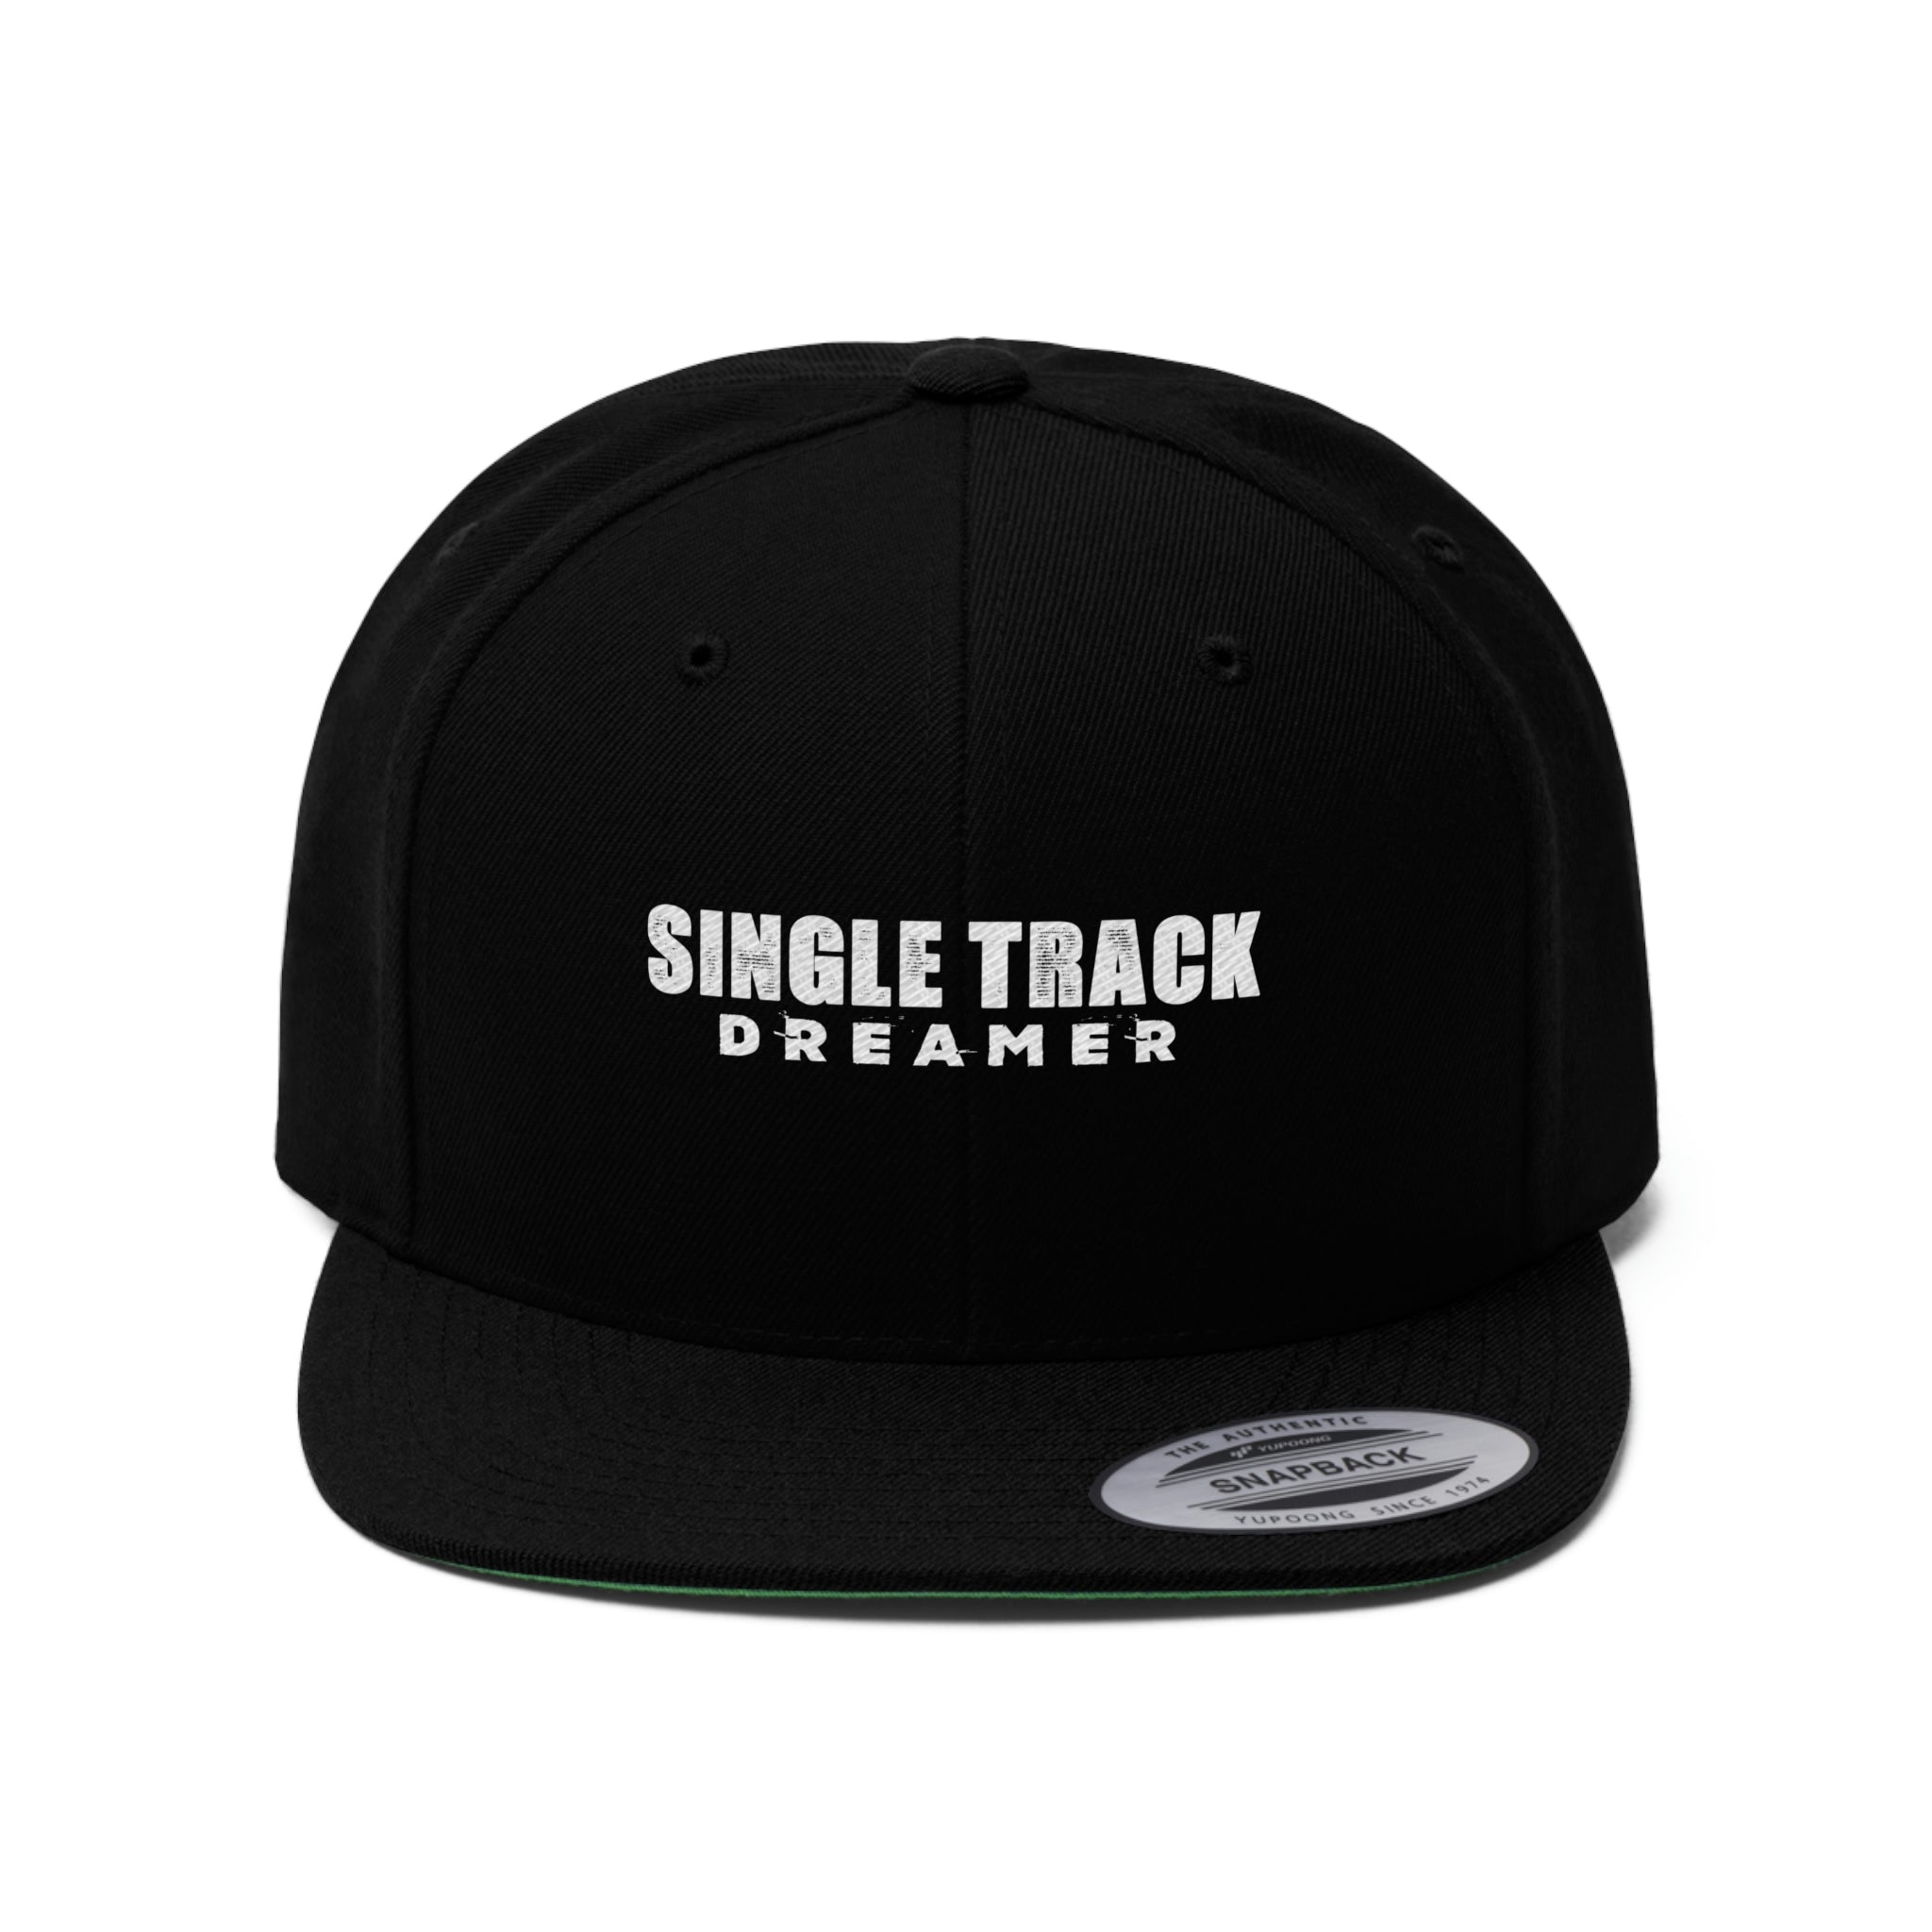 SNAPBACK CAP | SINGLE TRACK DREAMER, EMBROIDED | BLACK | ONE SIZE FITS ALL - Single Track Dreamer